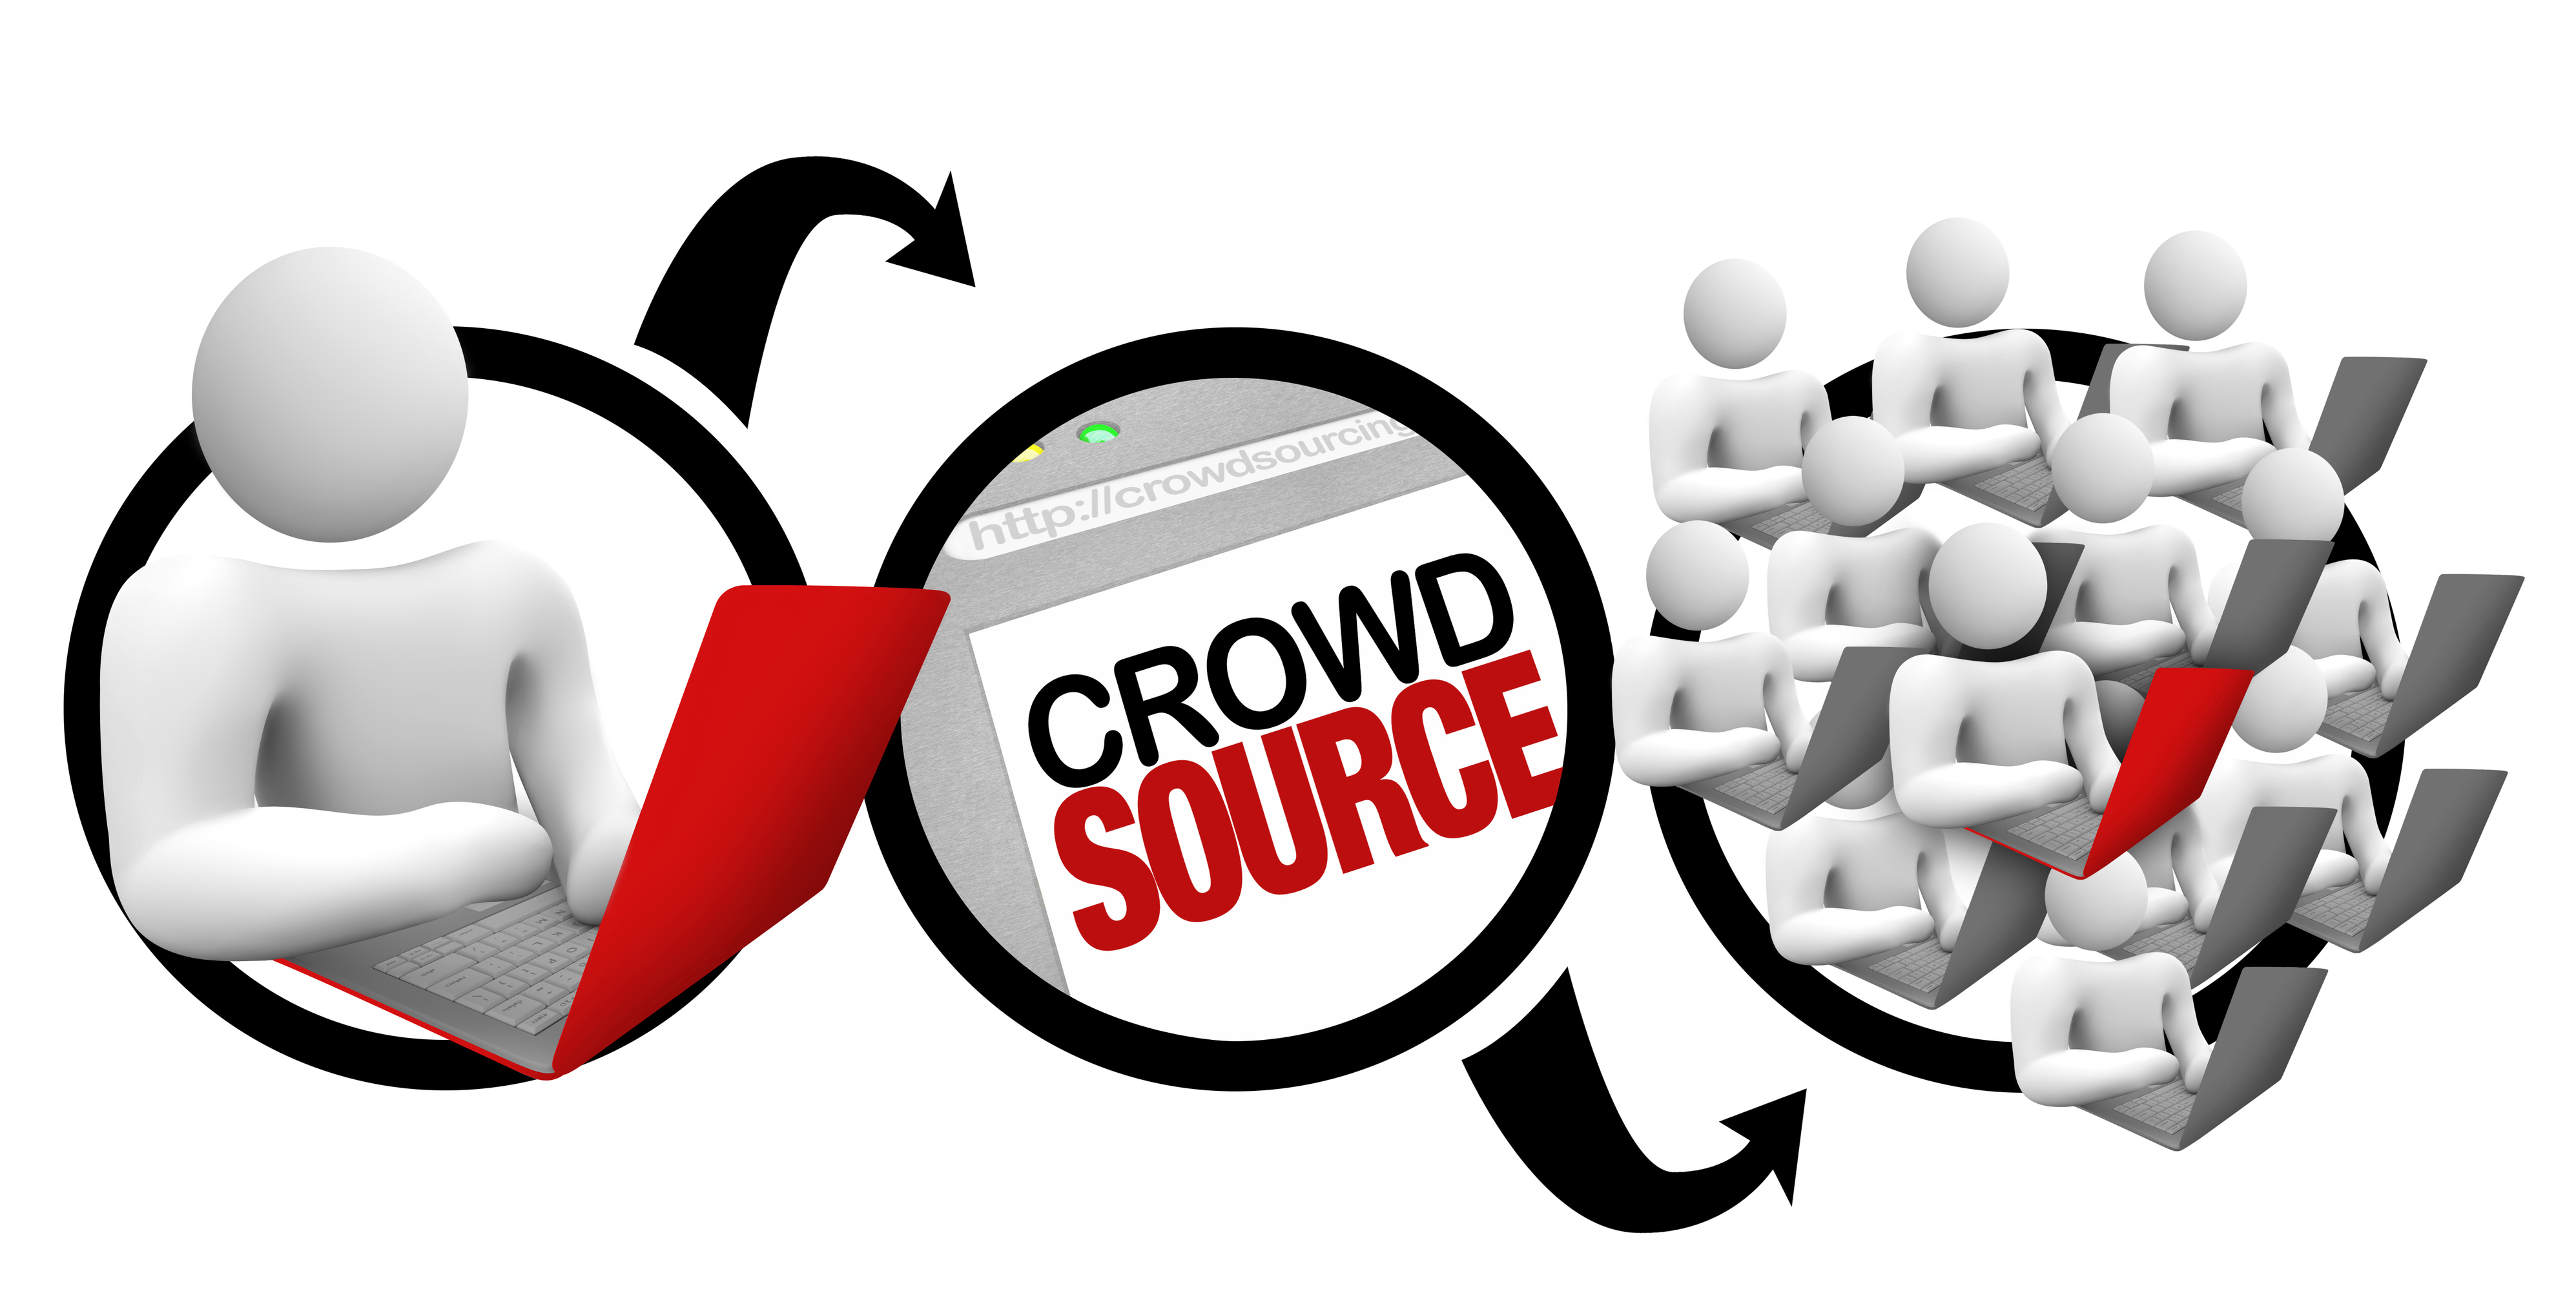 Crowd sourcing